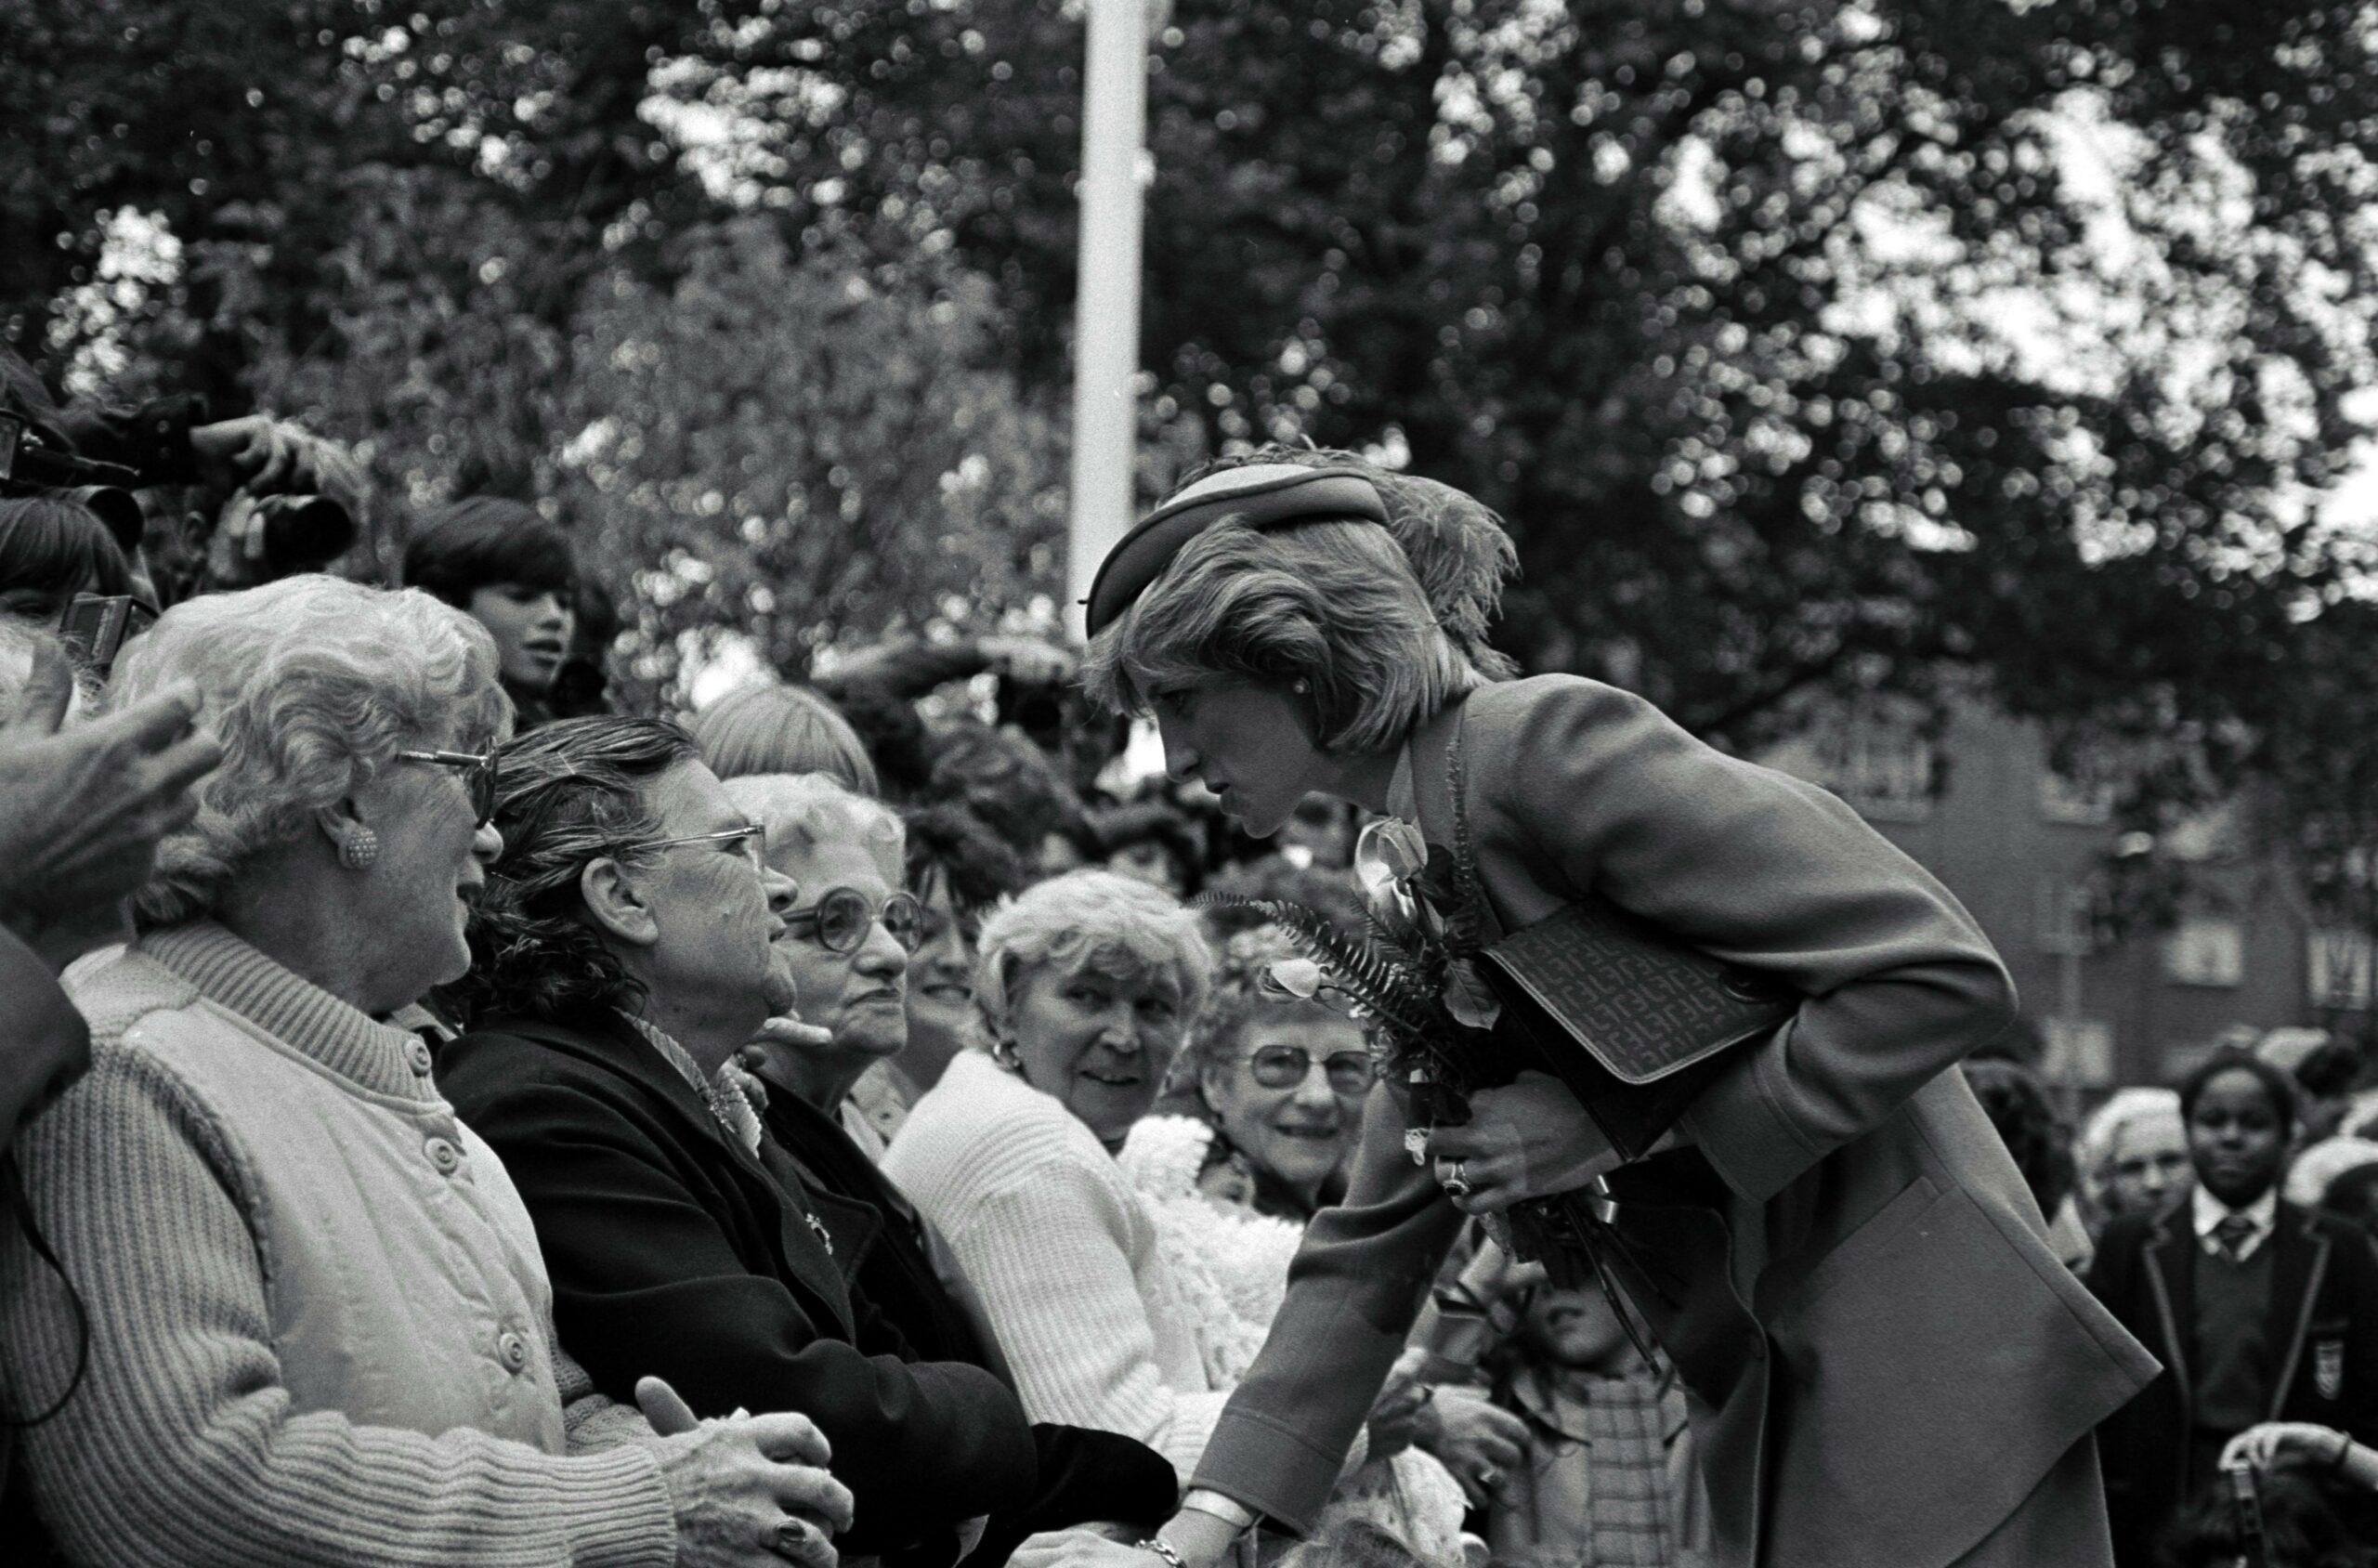 A black and white themed photo showing Princess Diana greeting people.